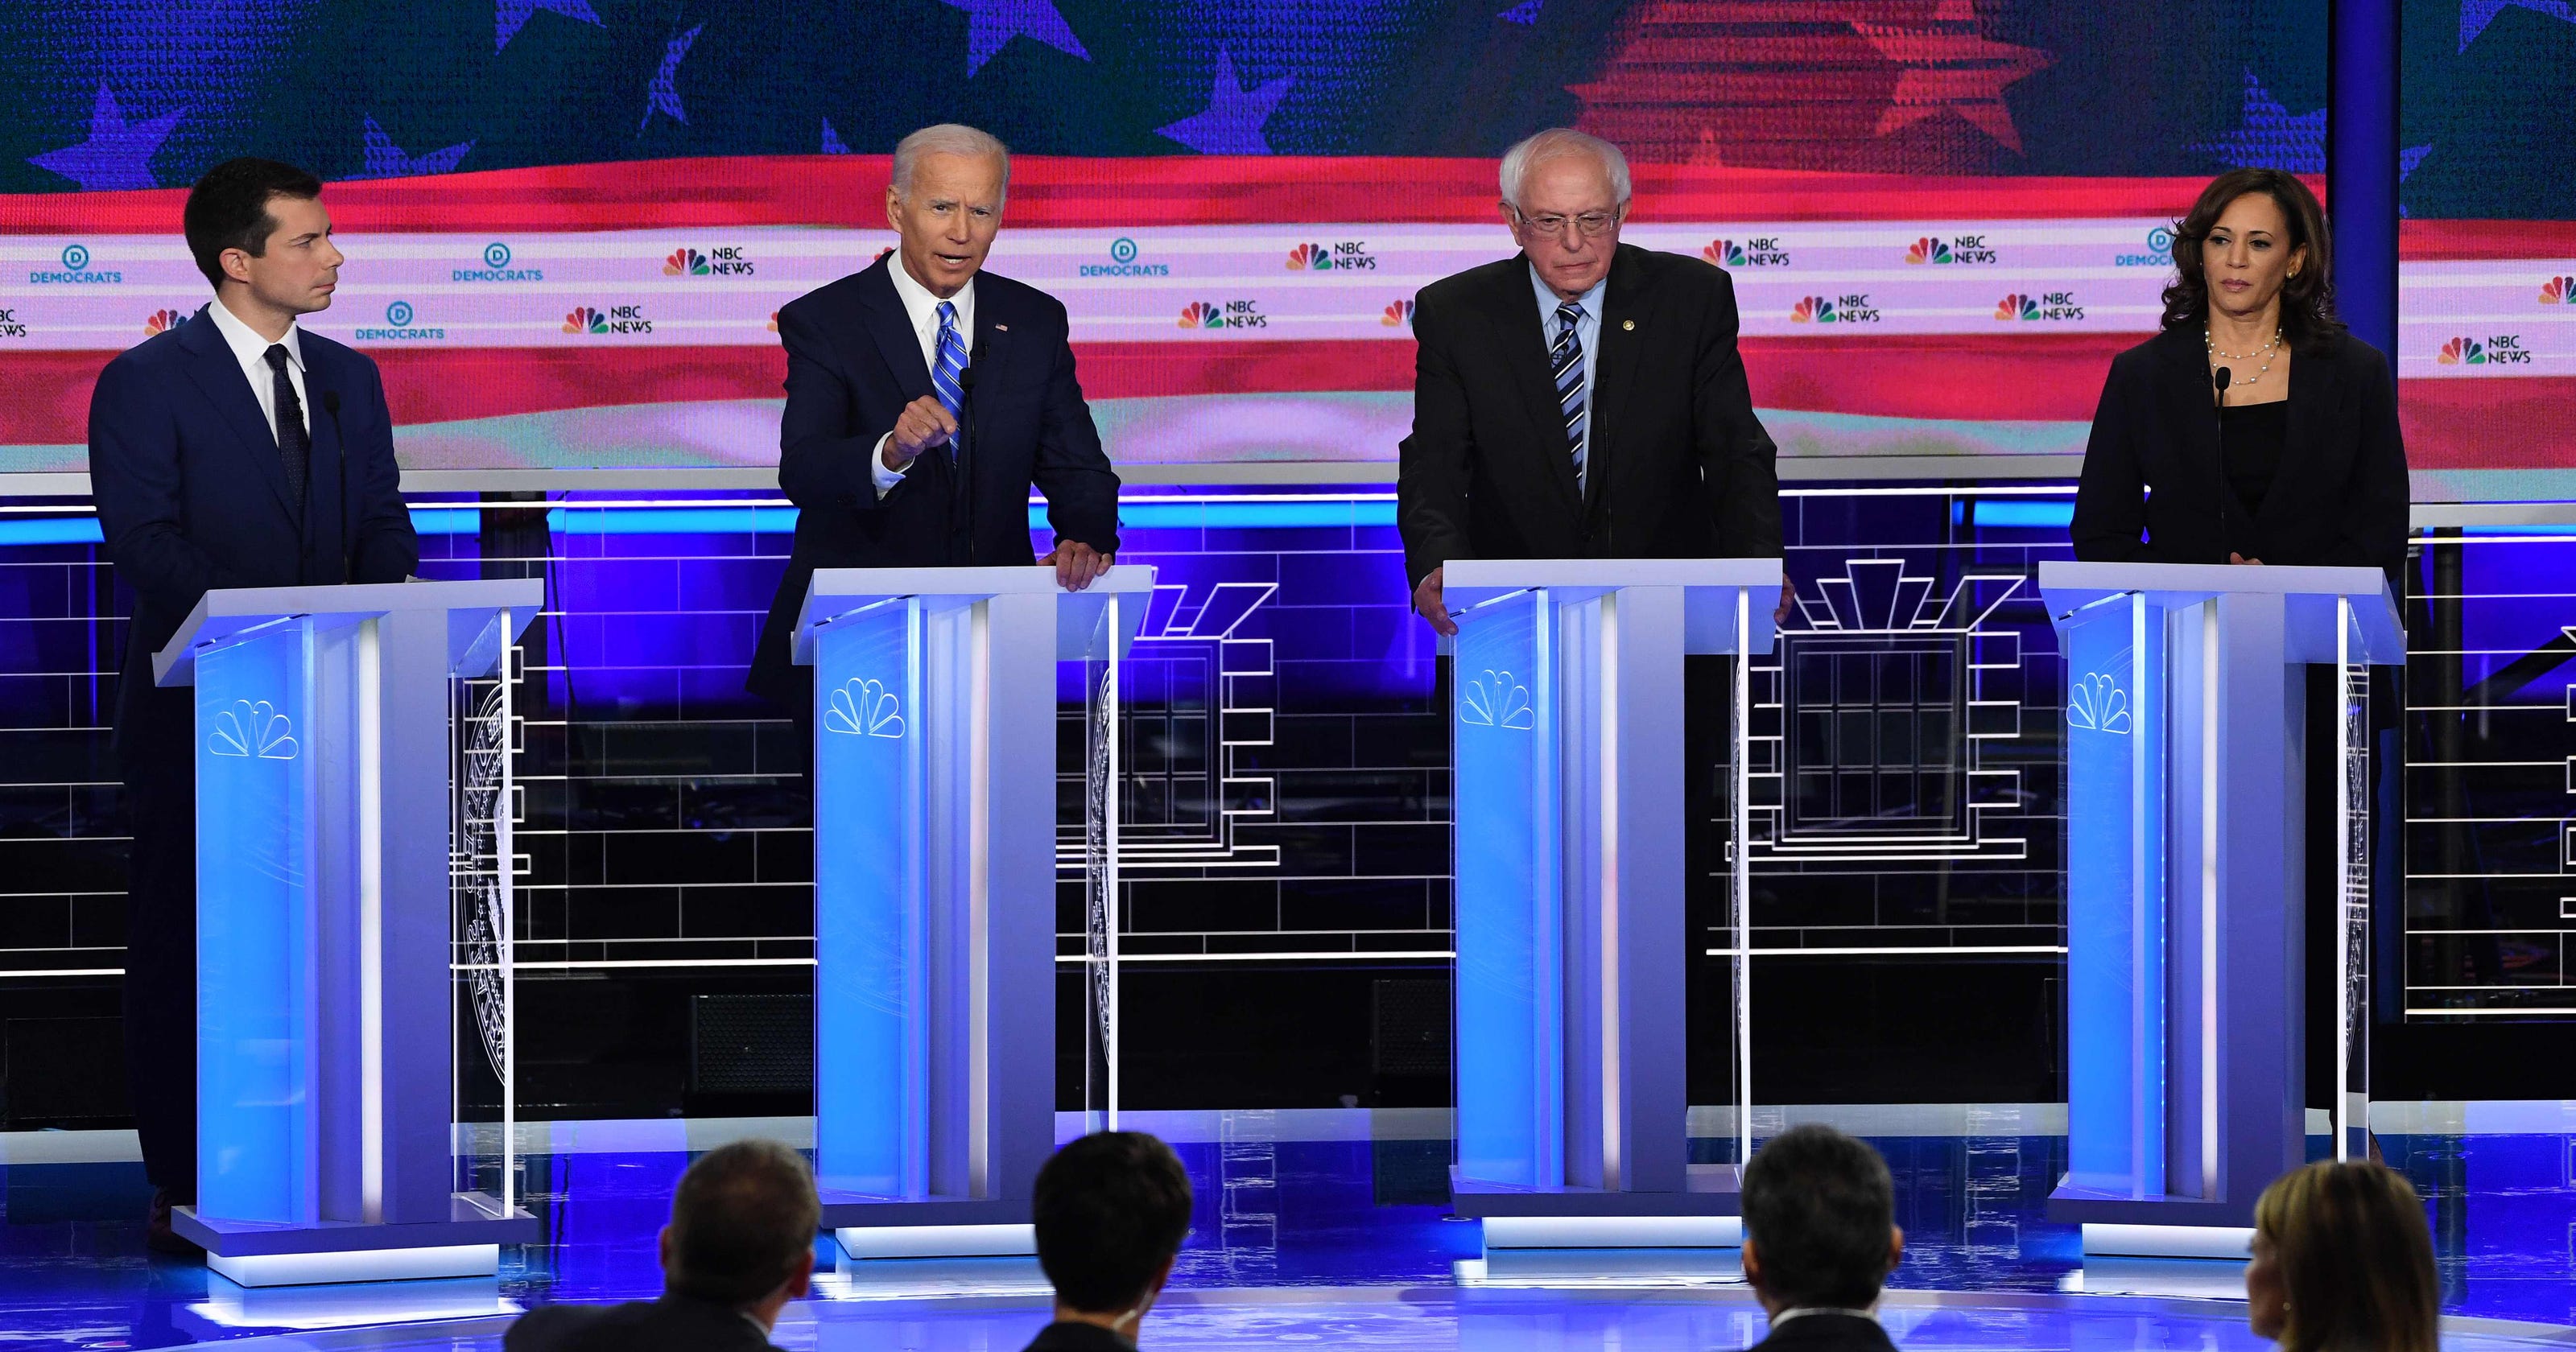 Democratic debates Grading the 2020 candidates vying to take on Trump